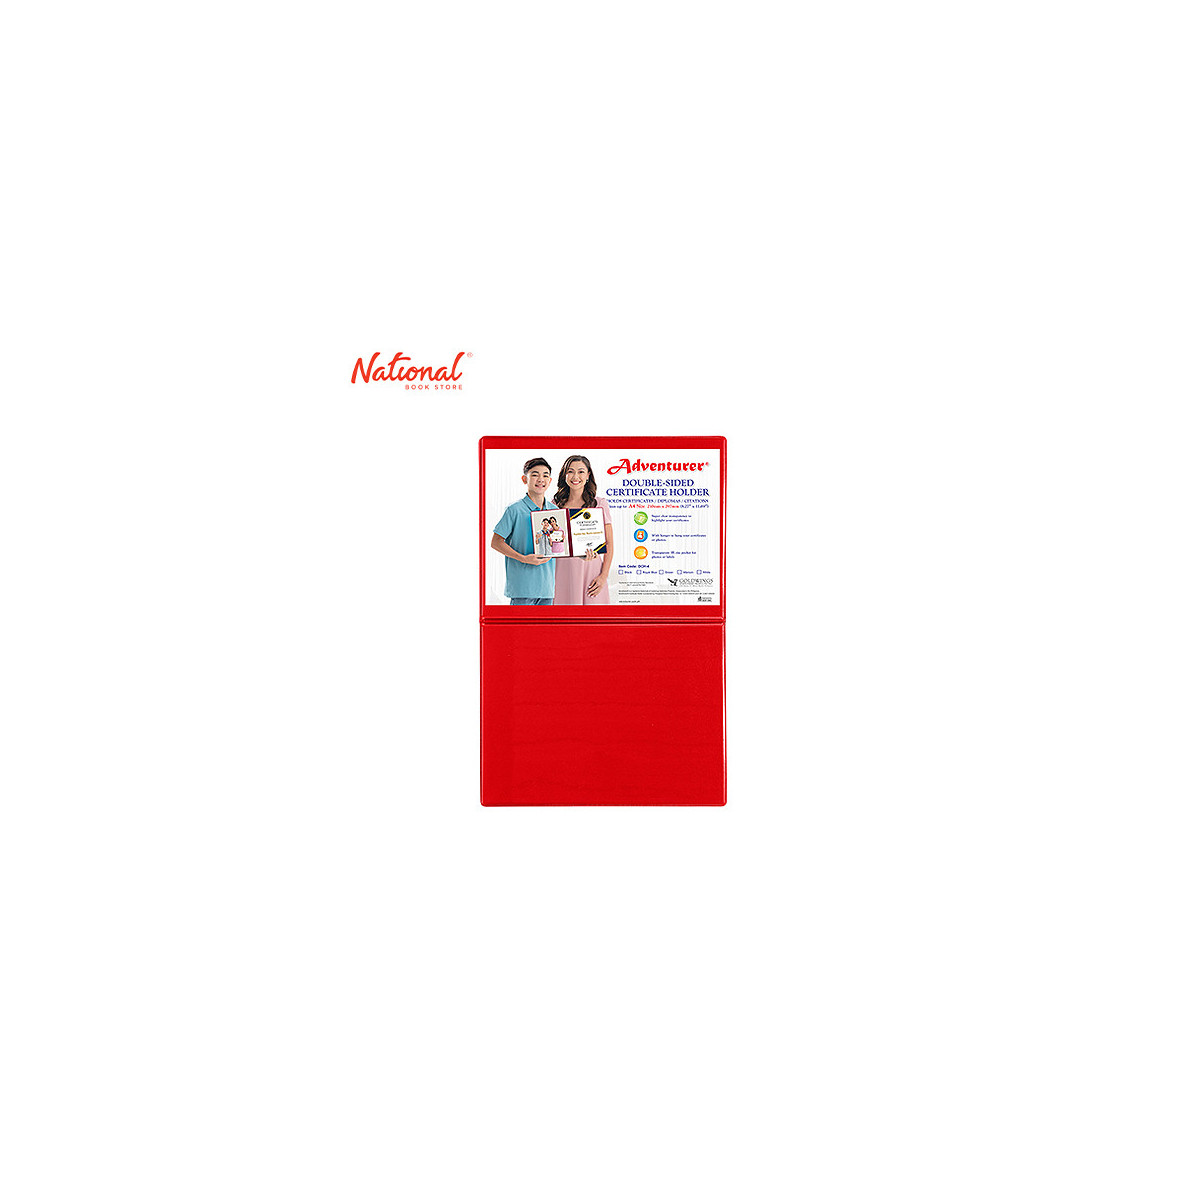 Adventurer Double Sided Certificate Holder 8.27x11.69 inches DCH-4, Red